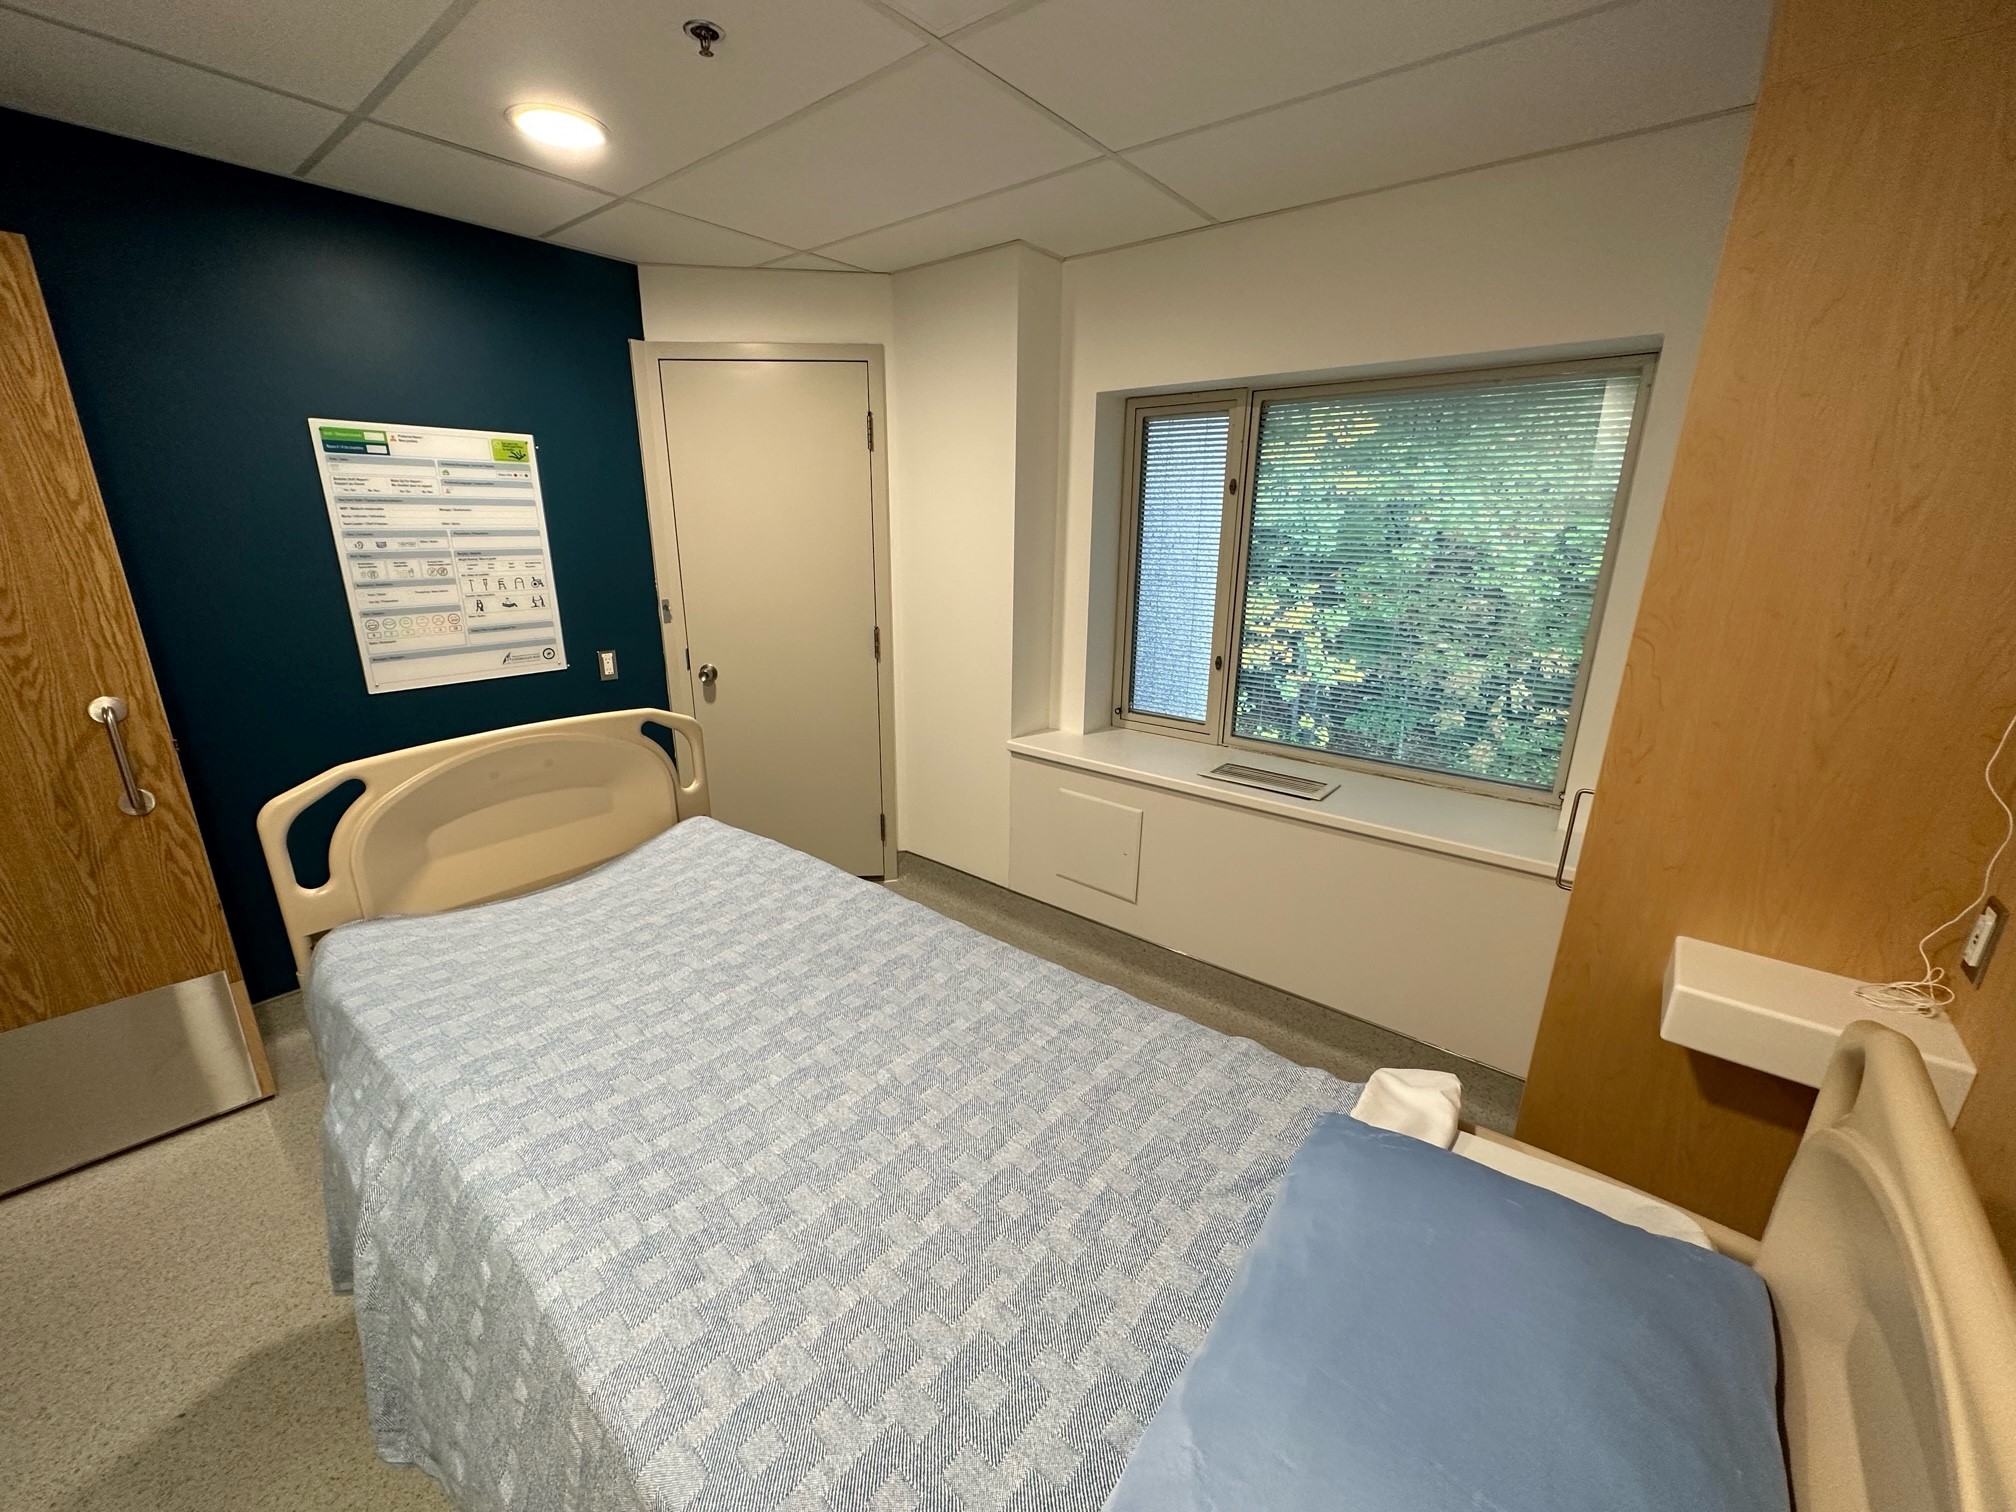 A hospital room showing a bed, and a window